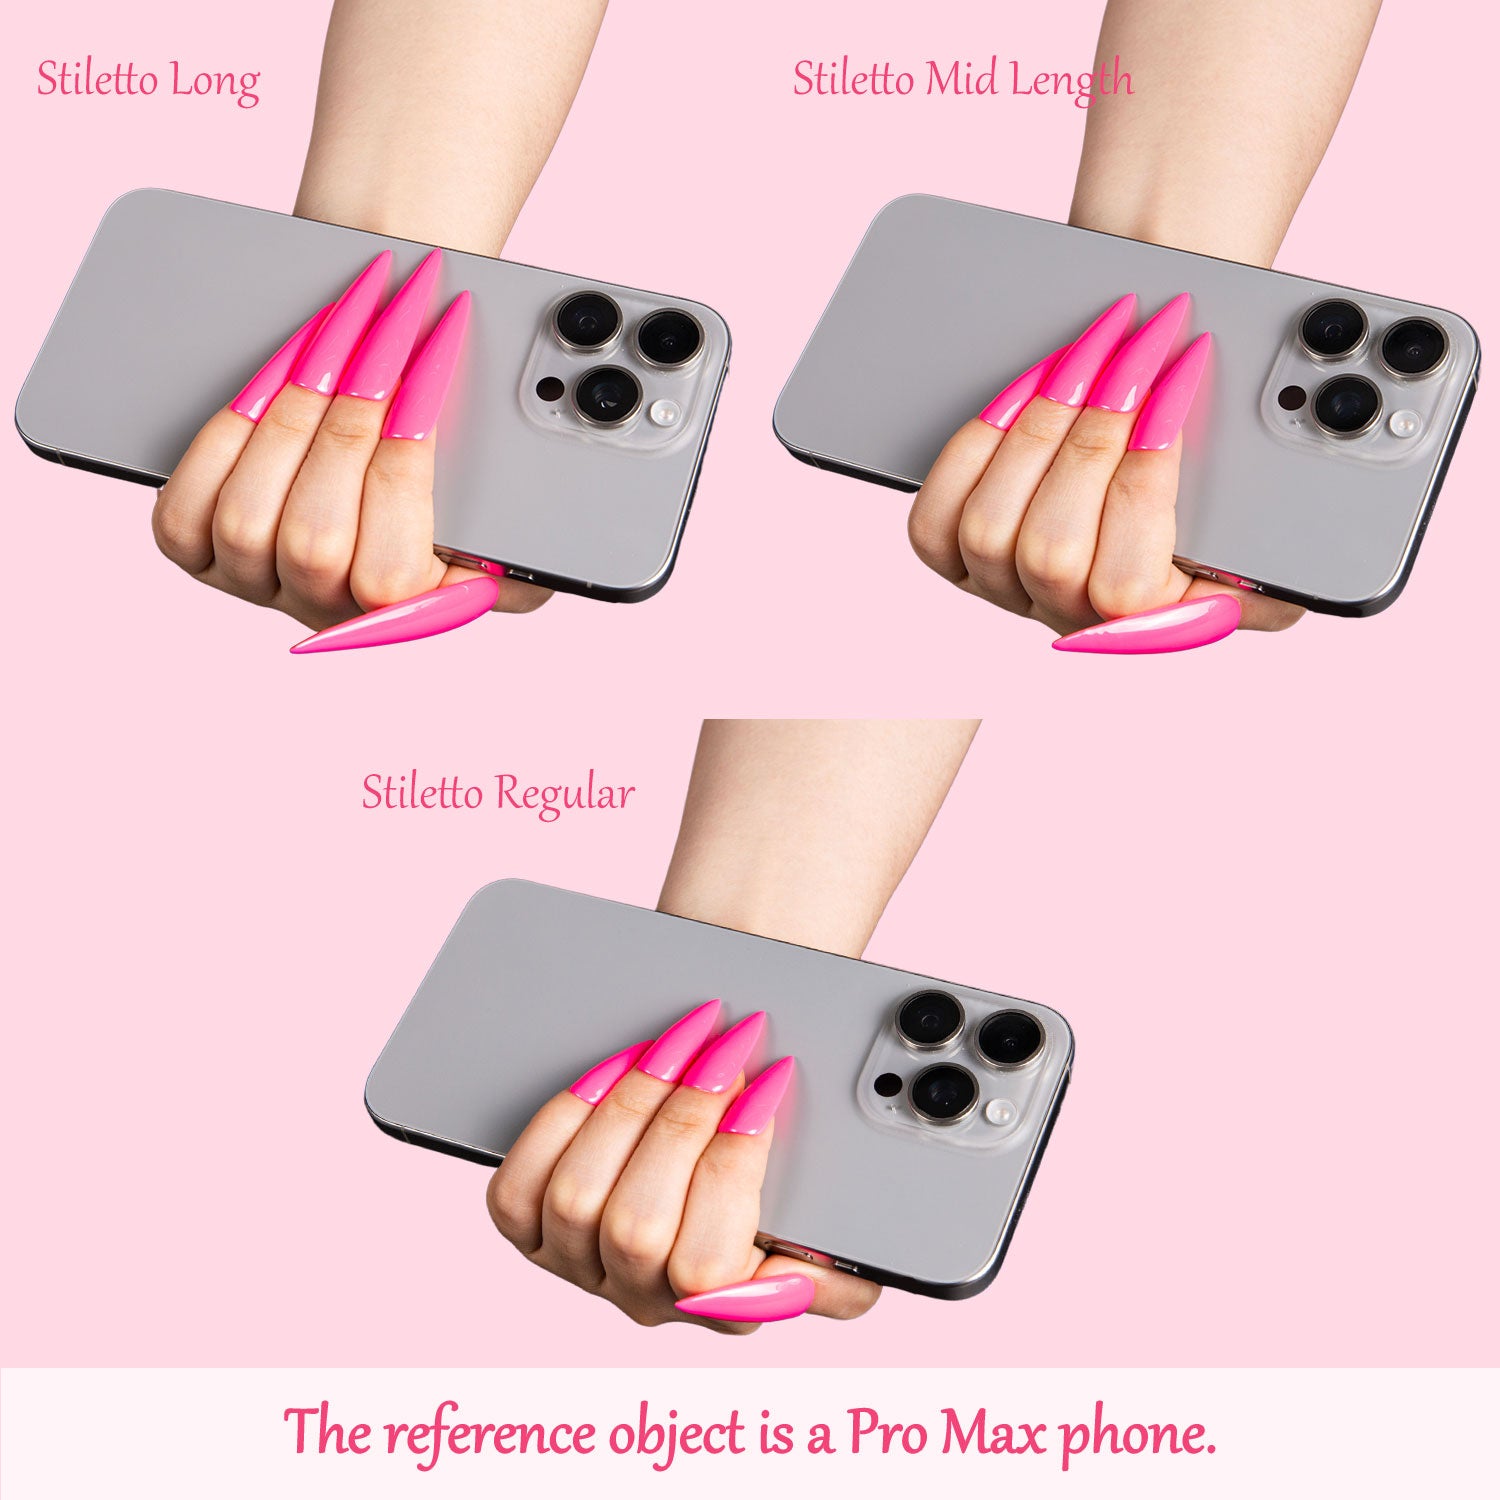 Comparison of three lengths of bright pink stiletto press-on nails holding a Pro Max phone: Stiletto Long, Stiletto Mid Length, and Stiletto Regular.